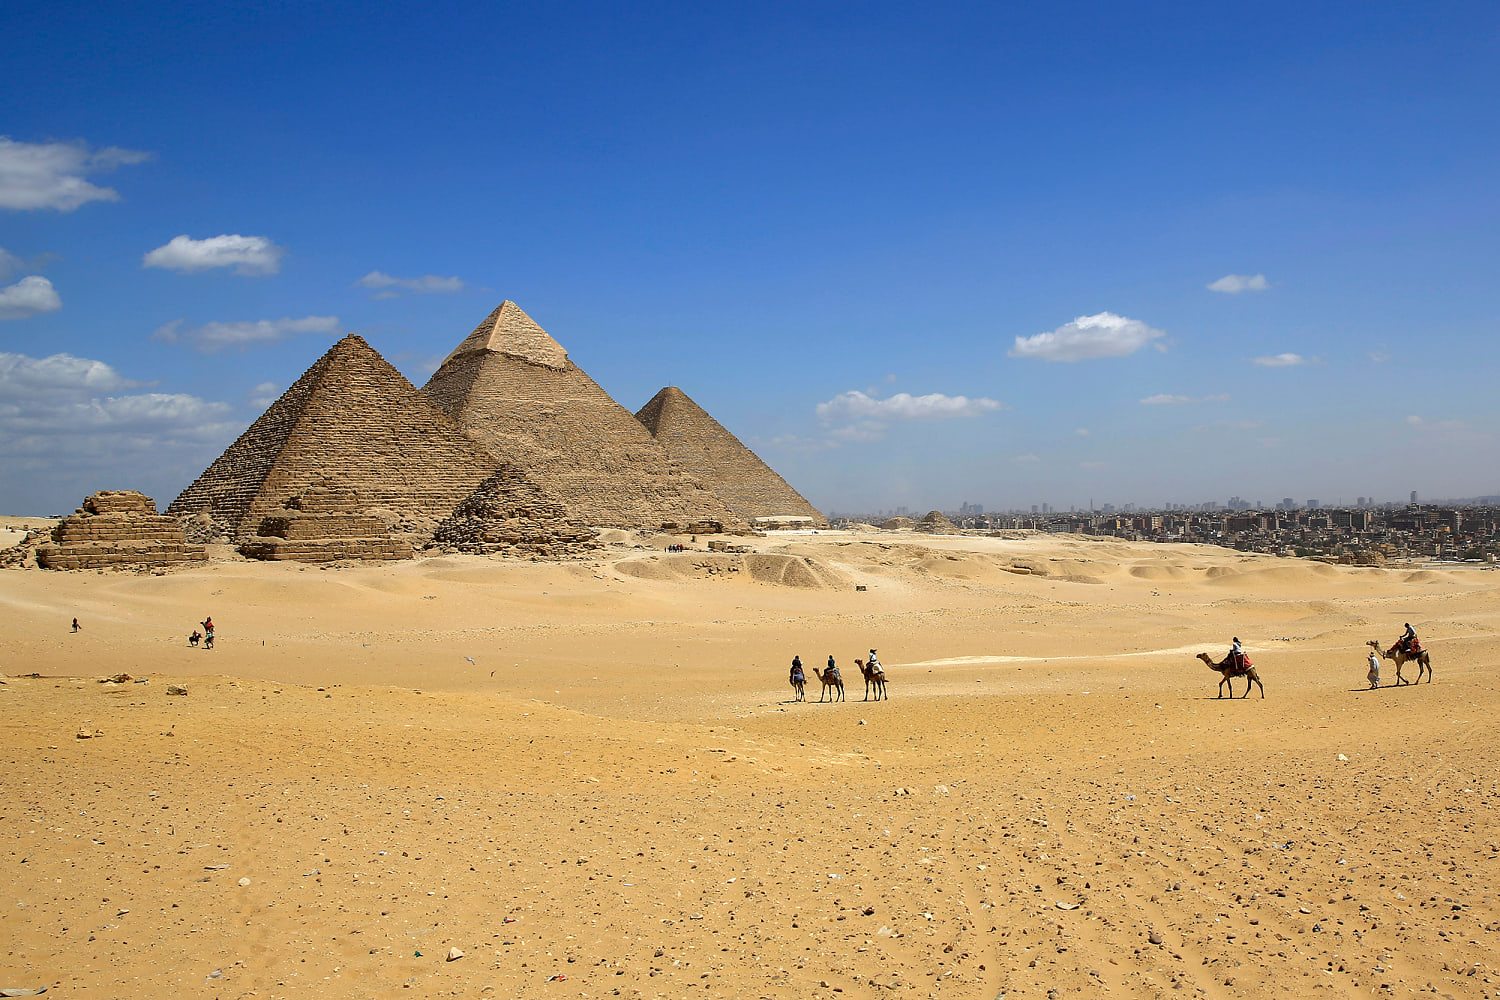 New research could solve the mystery behind the construction of Egypt’s pyramids